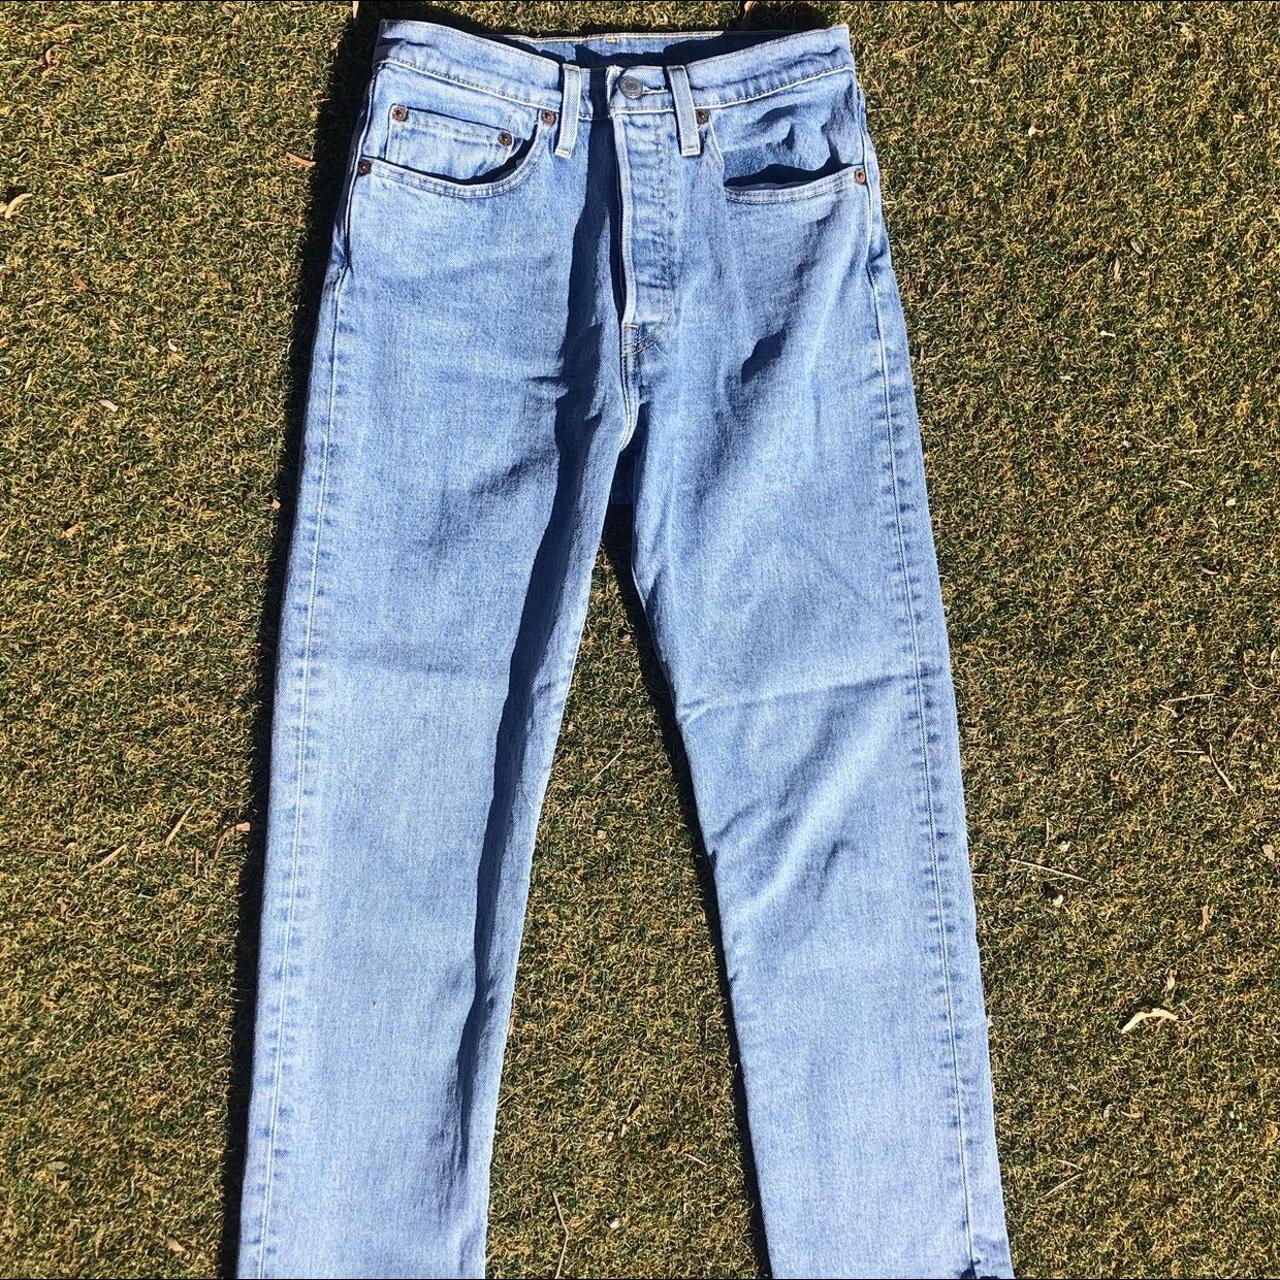 Levi's Women's Blue and White Jeans (3)